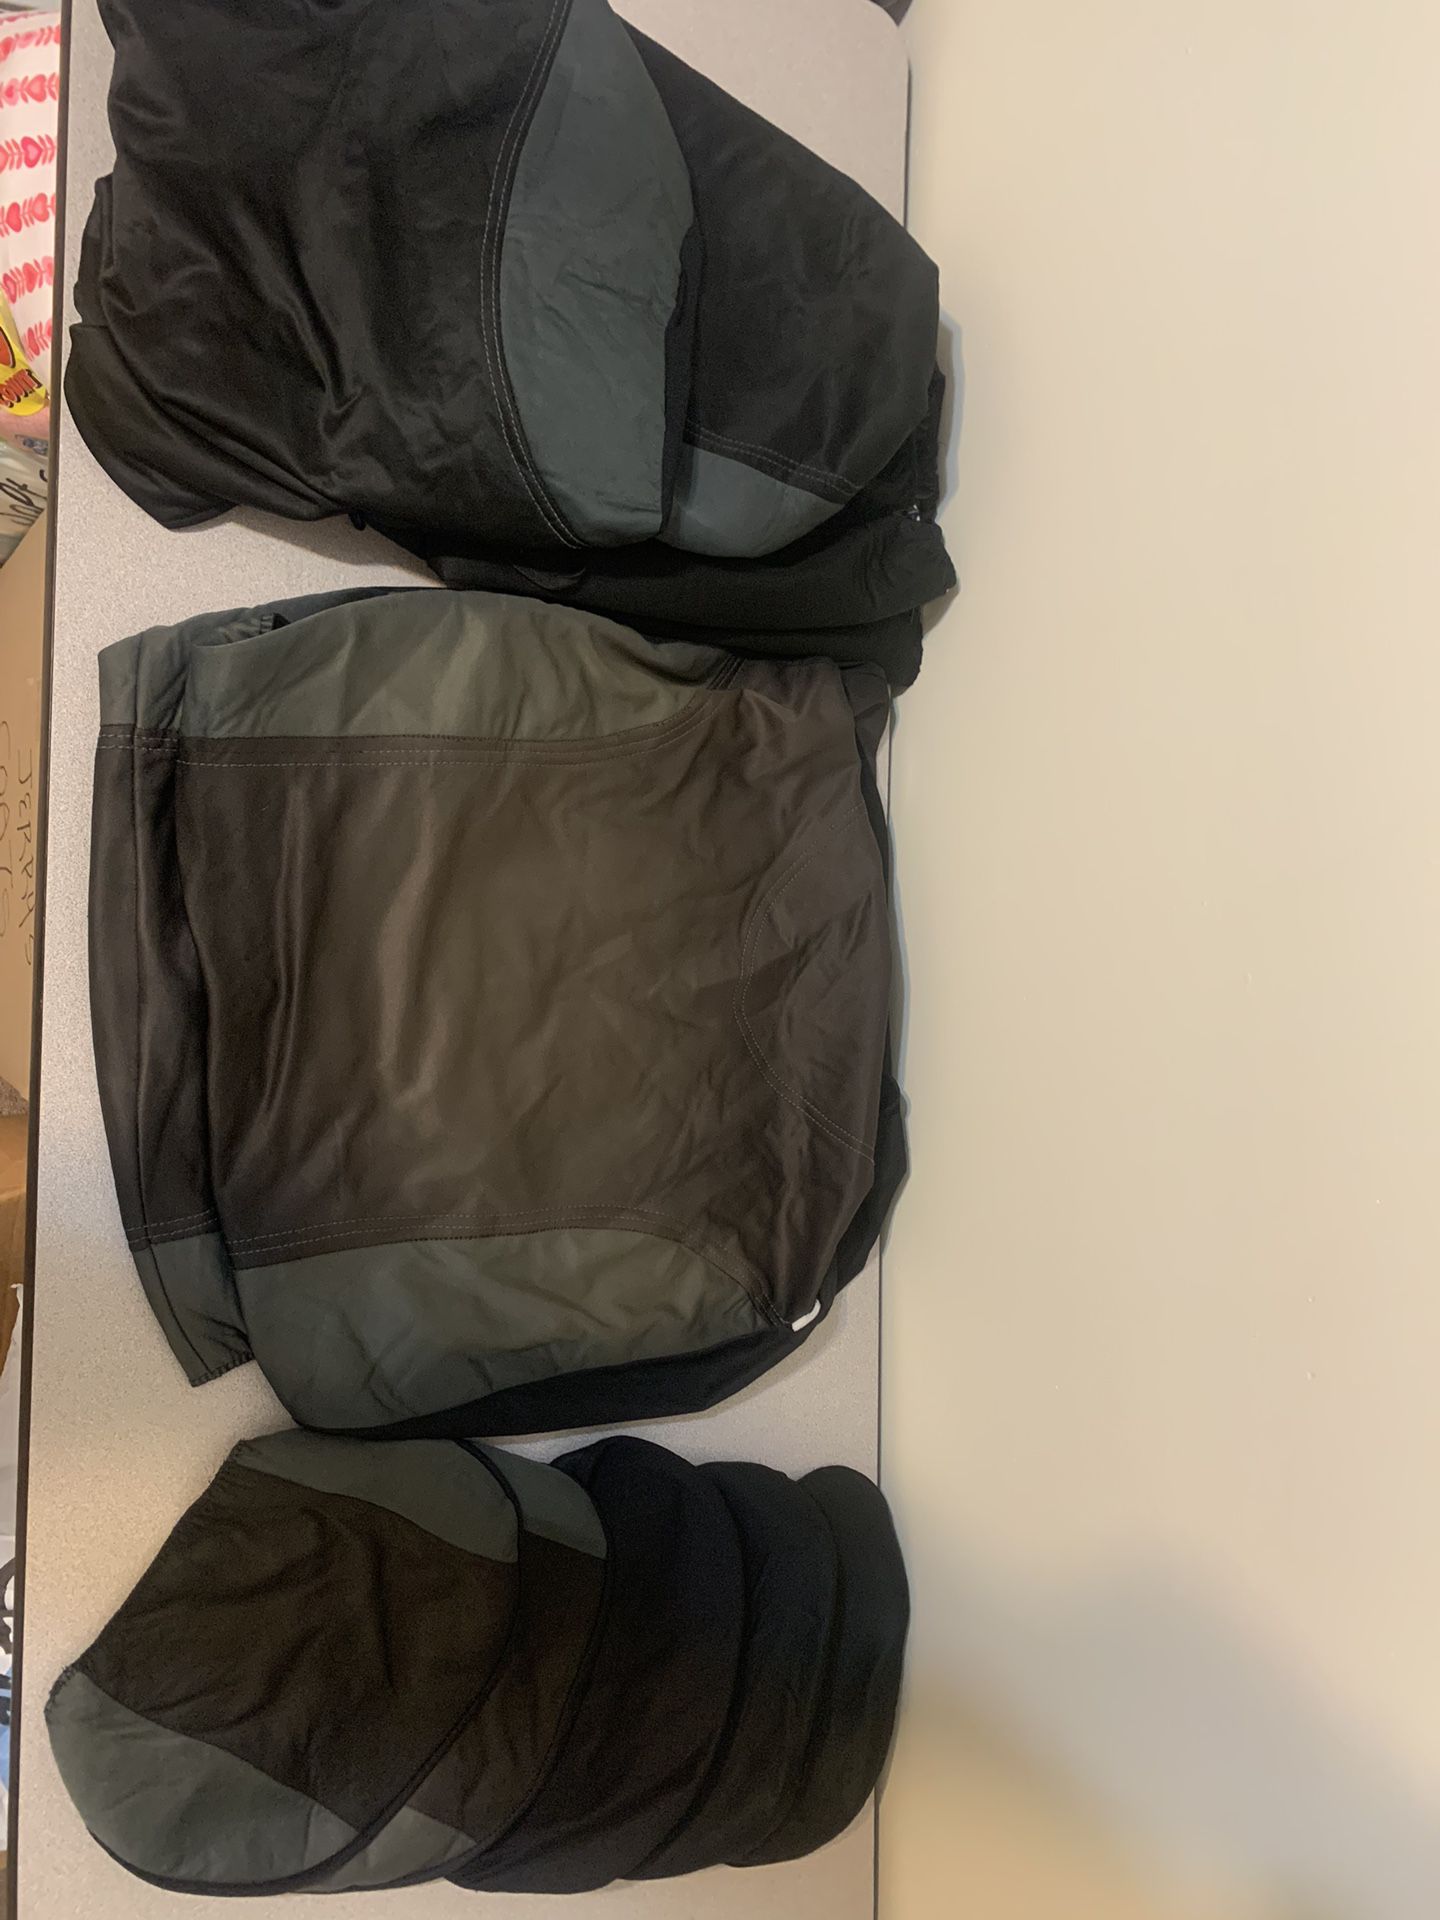 Universal Car Seat Covers 10 pieces Black & Gray color at good condition Firm price 